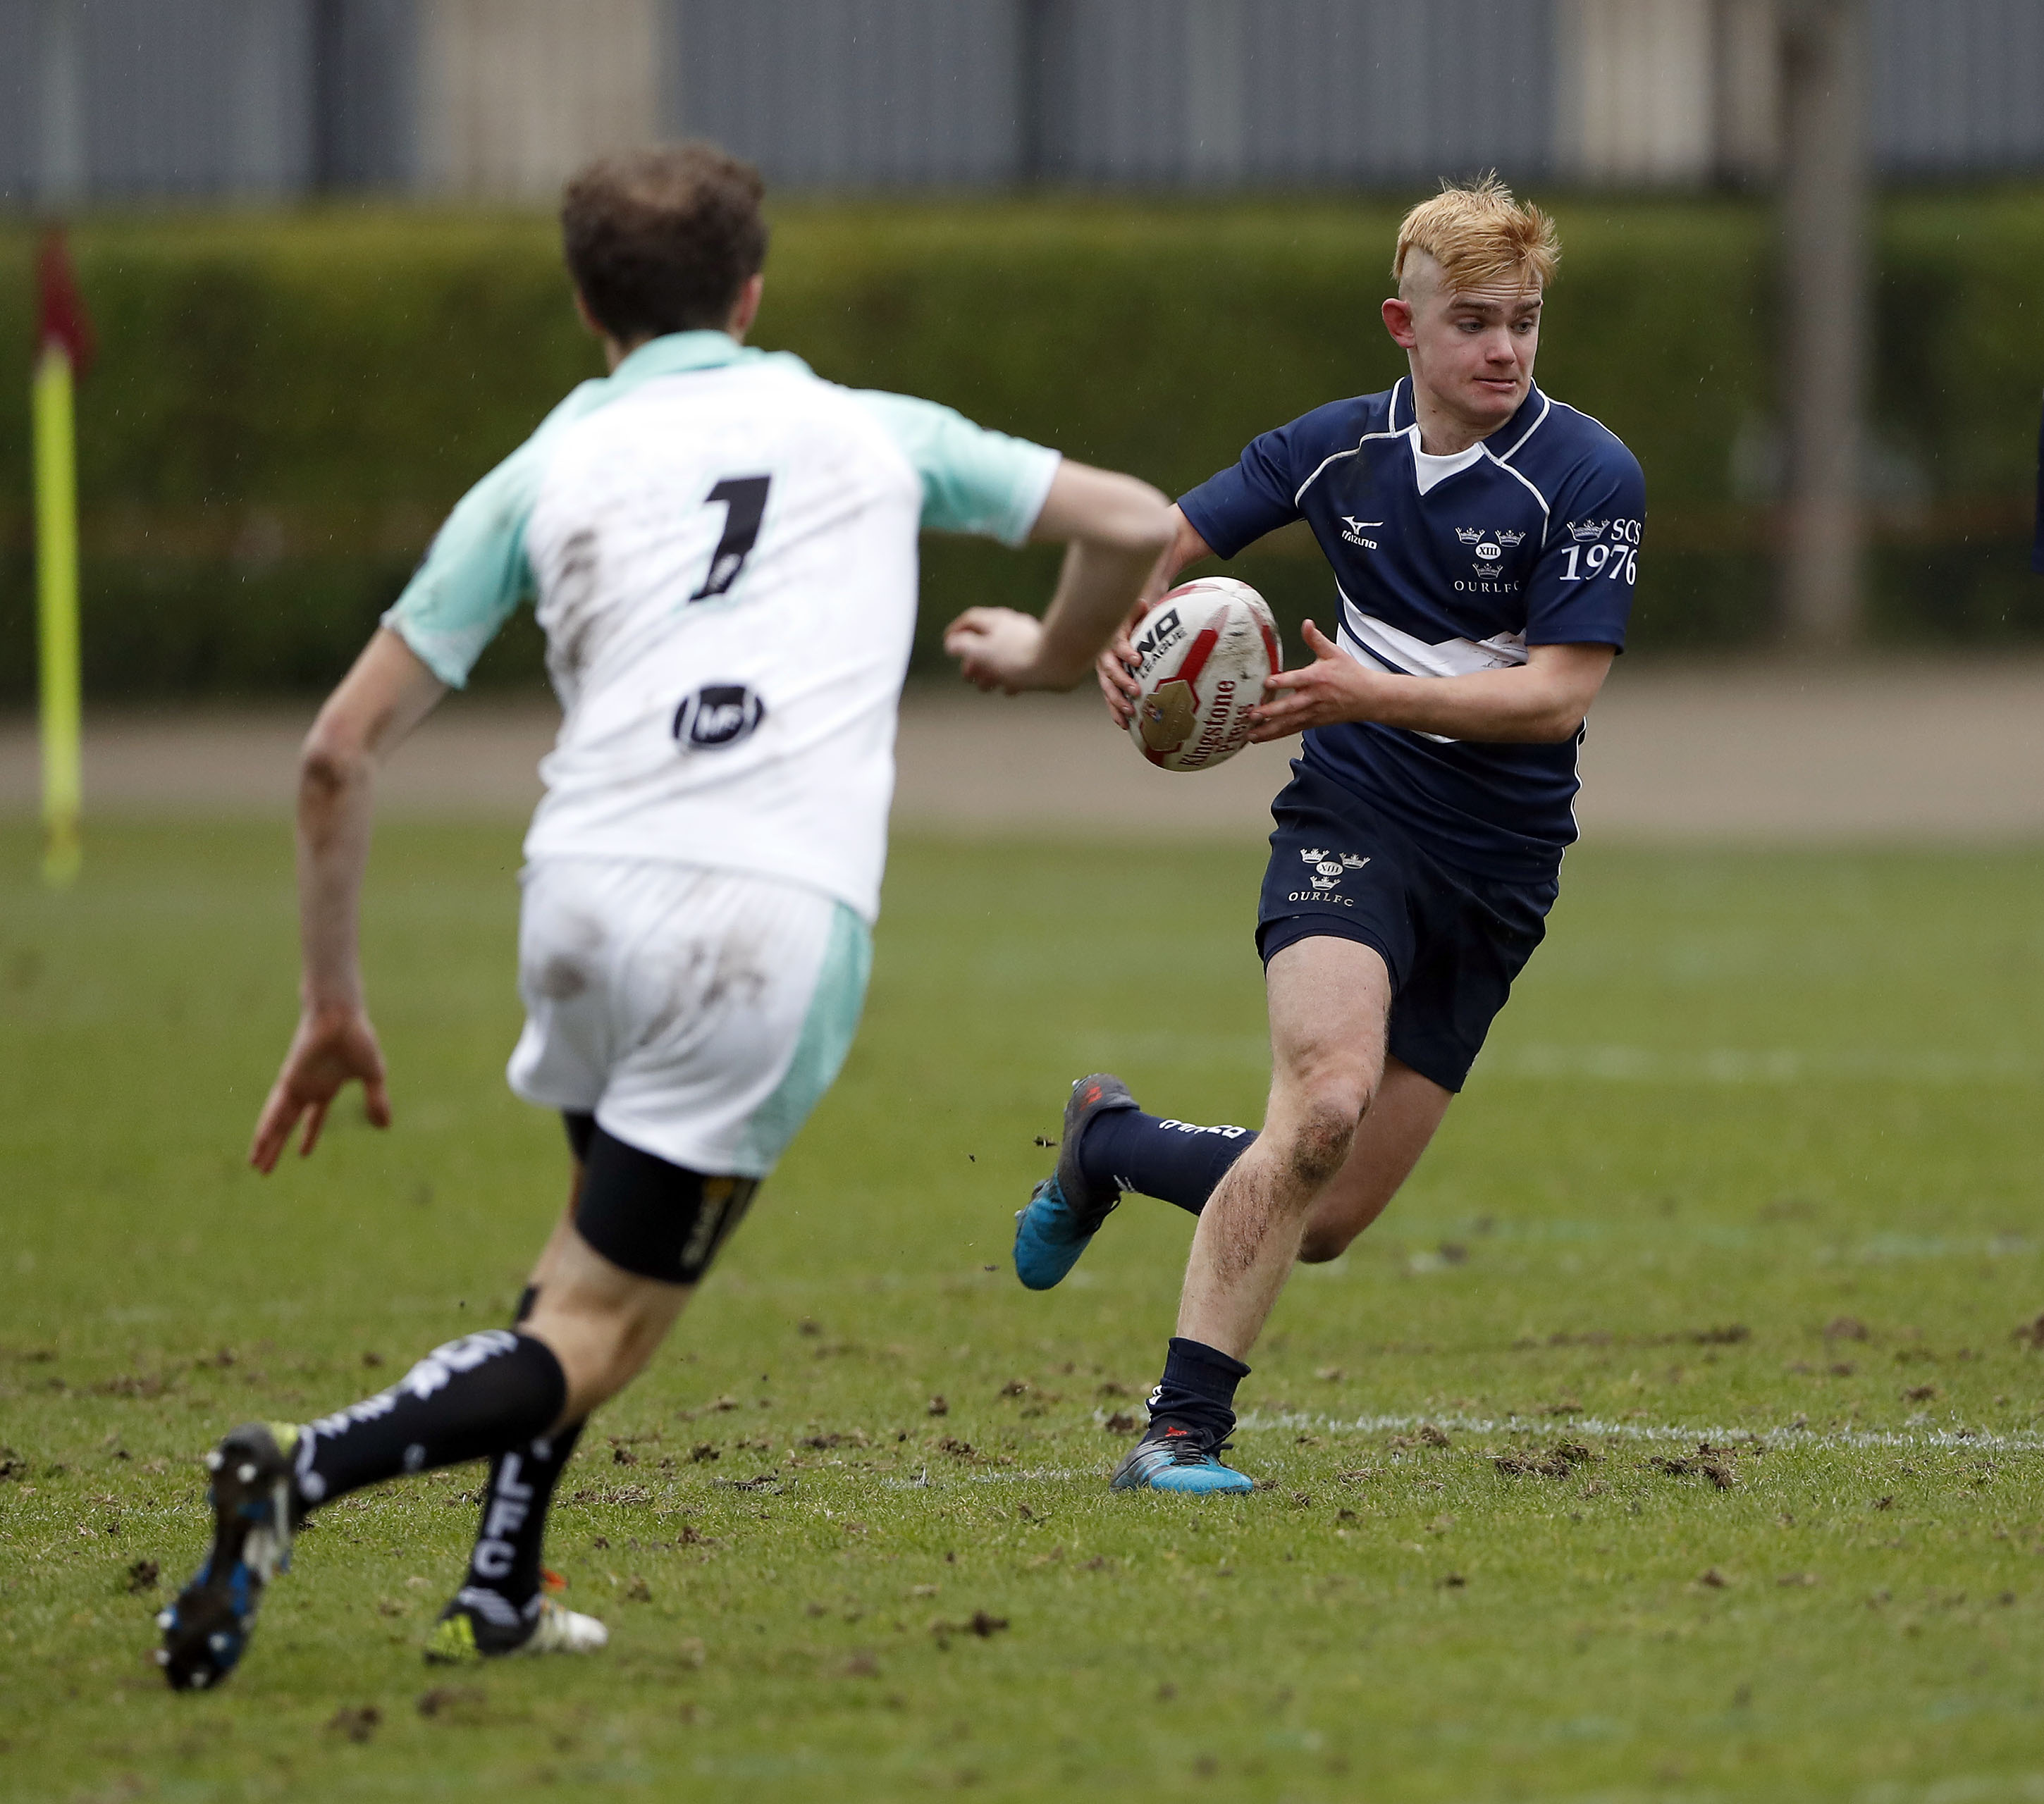 Action during the RCMA Varsity Rugby League game between Cambridge University and Oxford University at the HAC Ground, Moorgate, London on Fri Mar 9, 2018